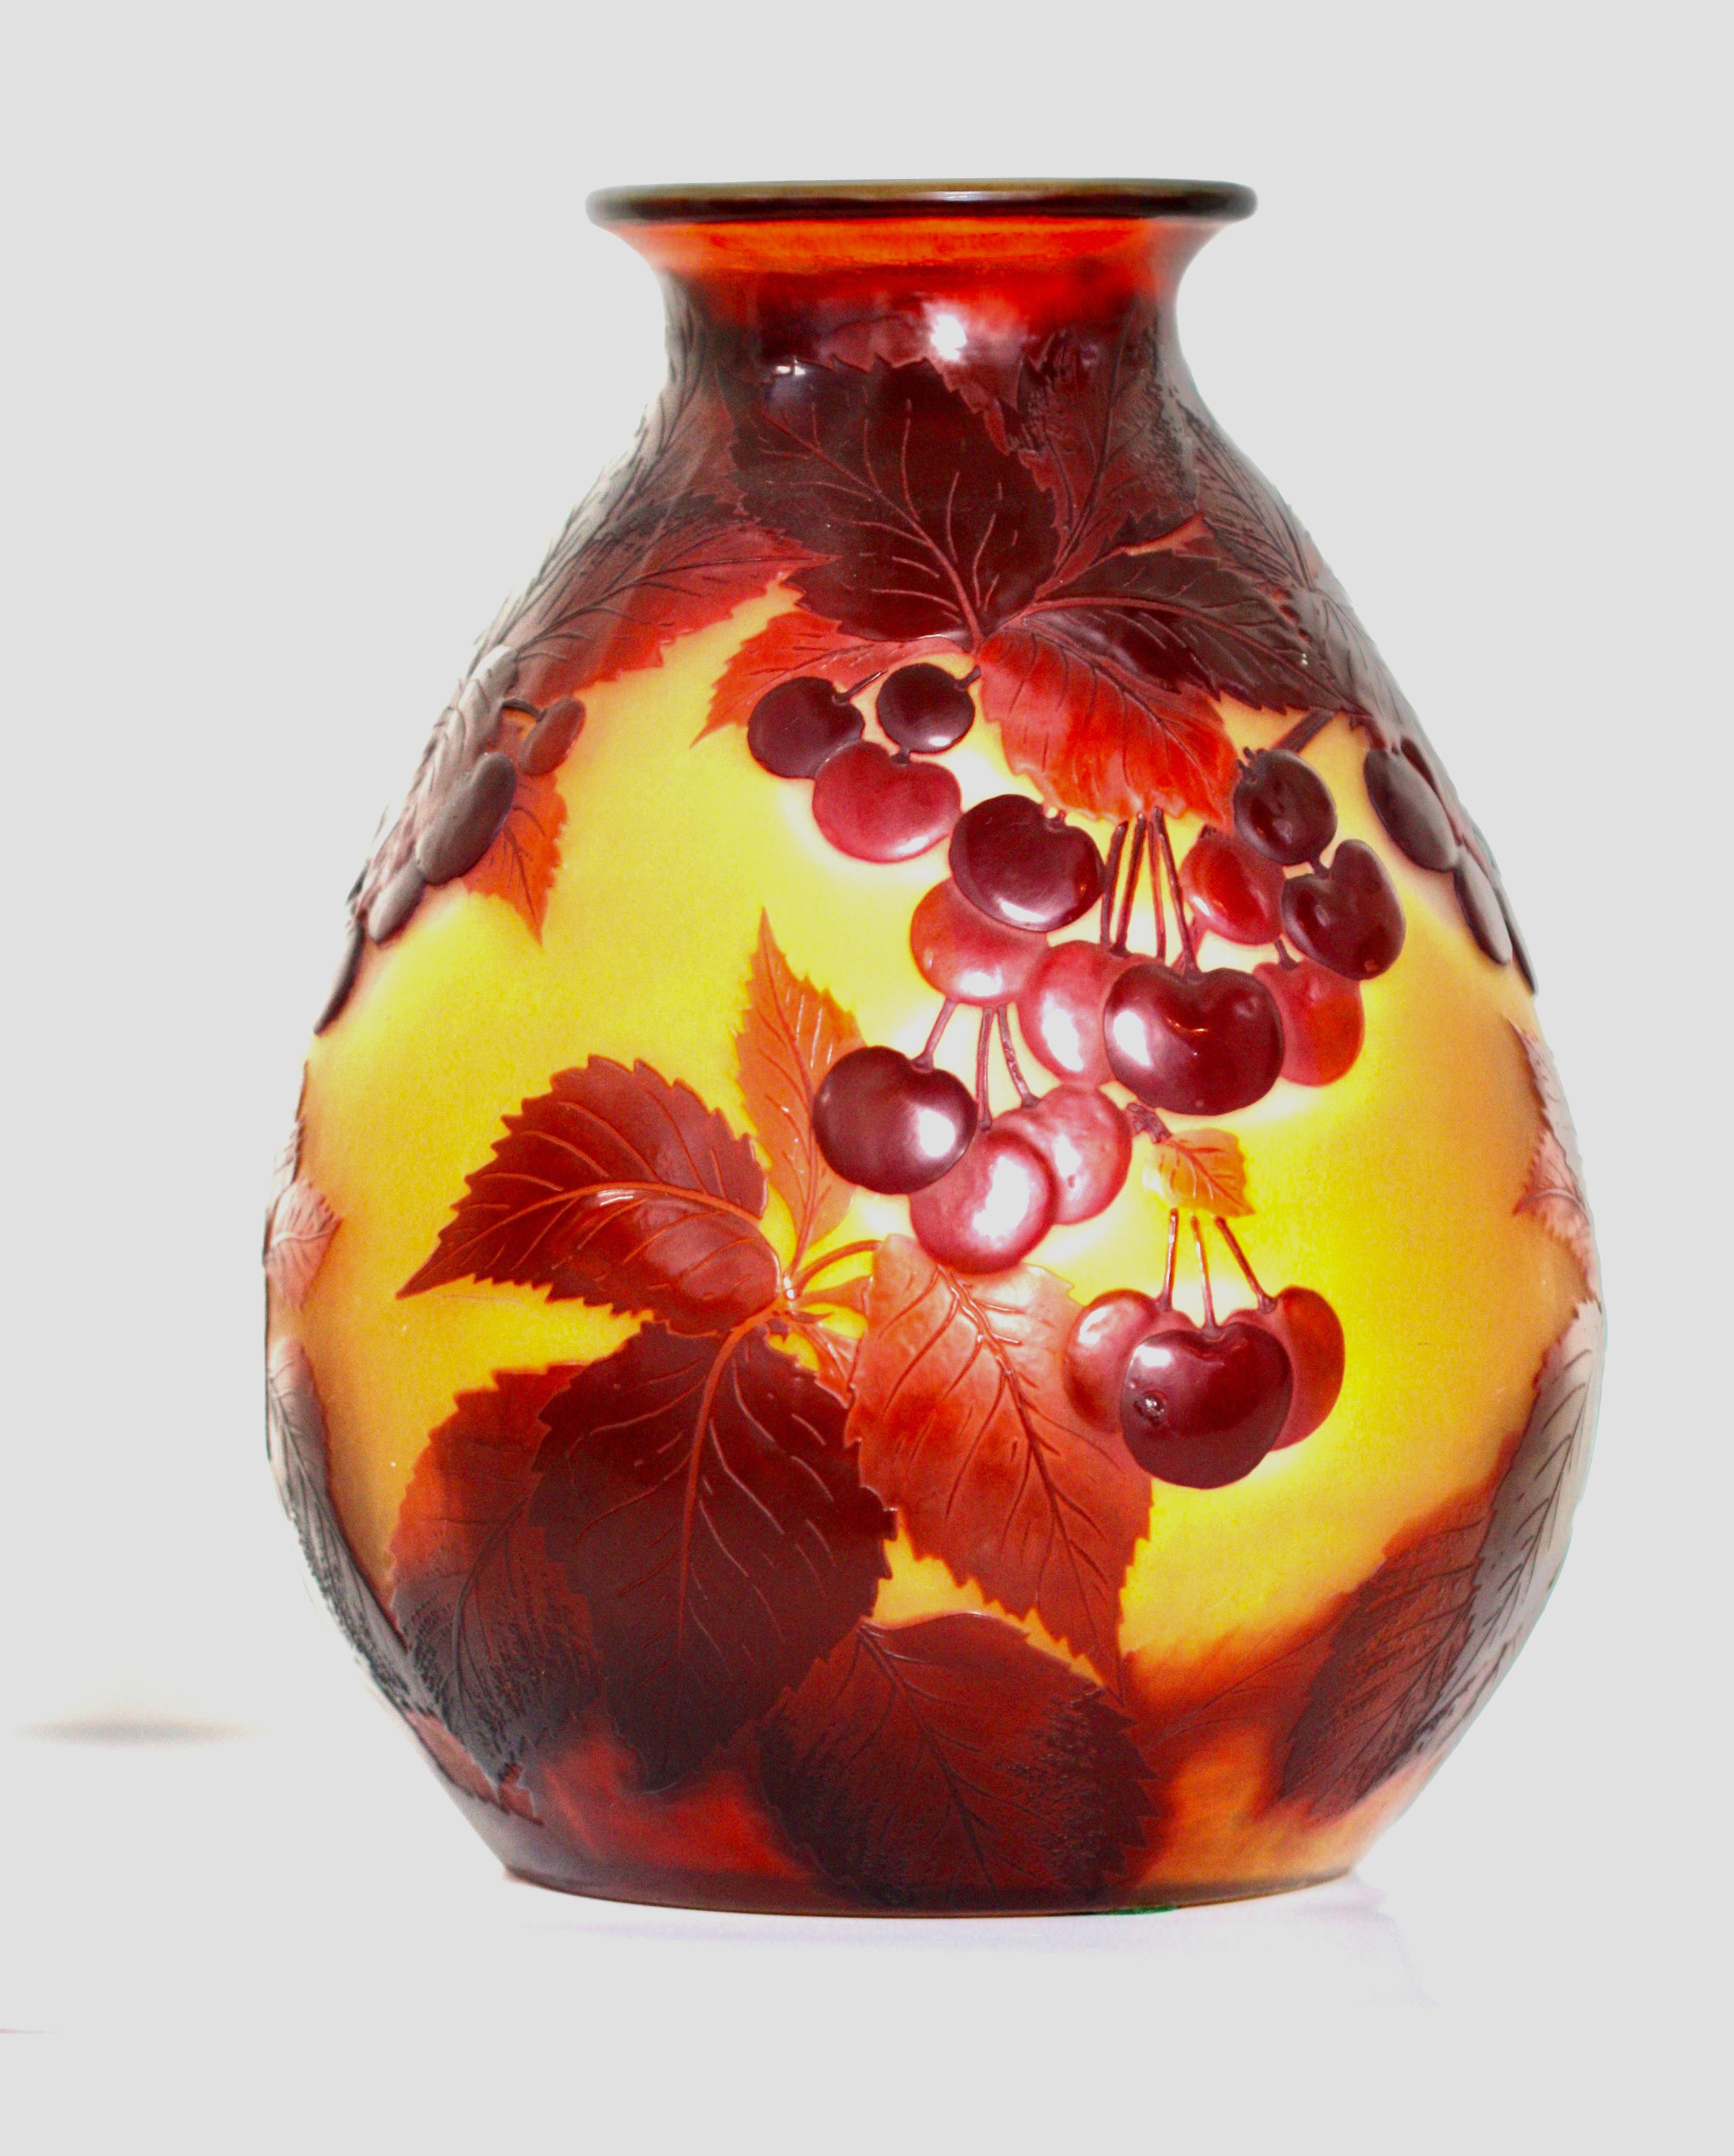 Emile Galle, French (1846-1904) 
A Fine 'Blow-out' Cameo Glass Vase, 'Cherry', circa 1900. 
Height 10.5 in. (26.67 cm.), 
signed in cameo Galle.